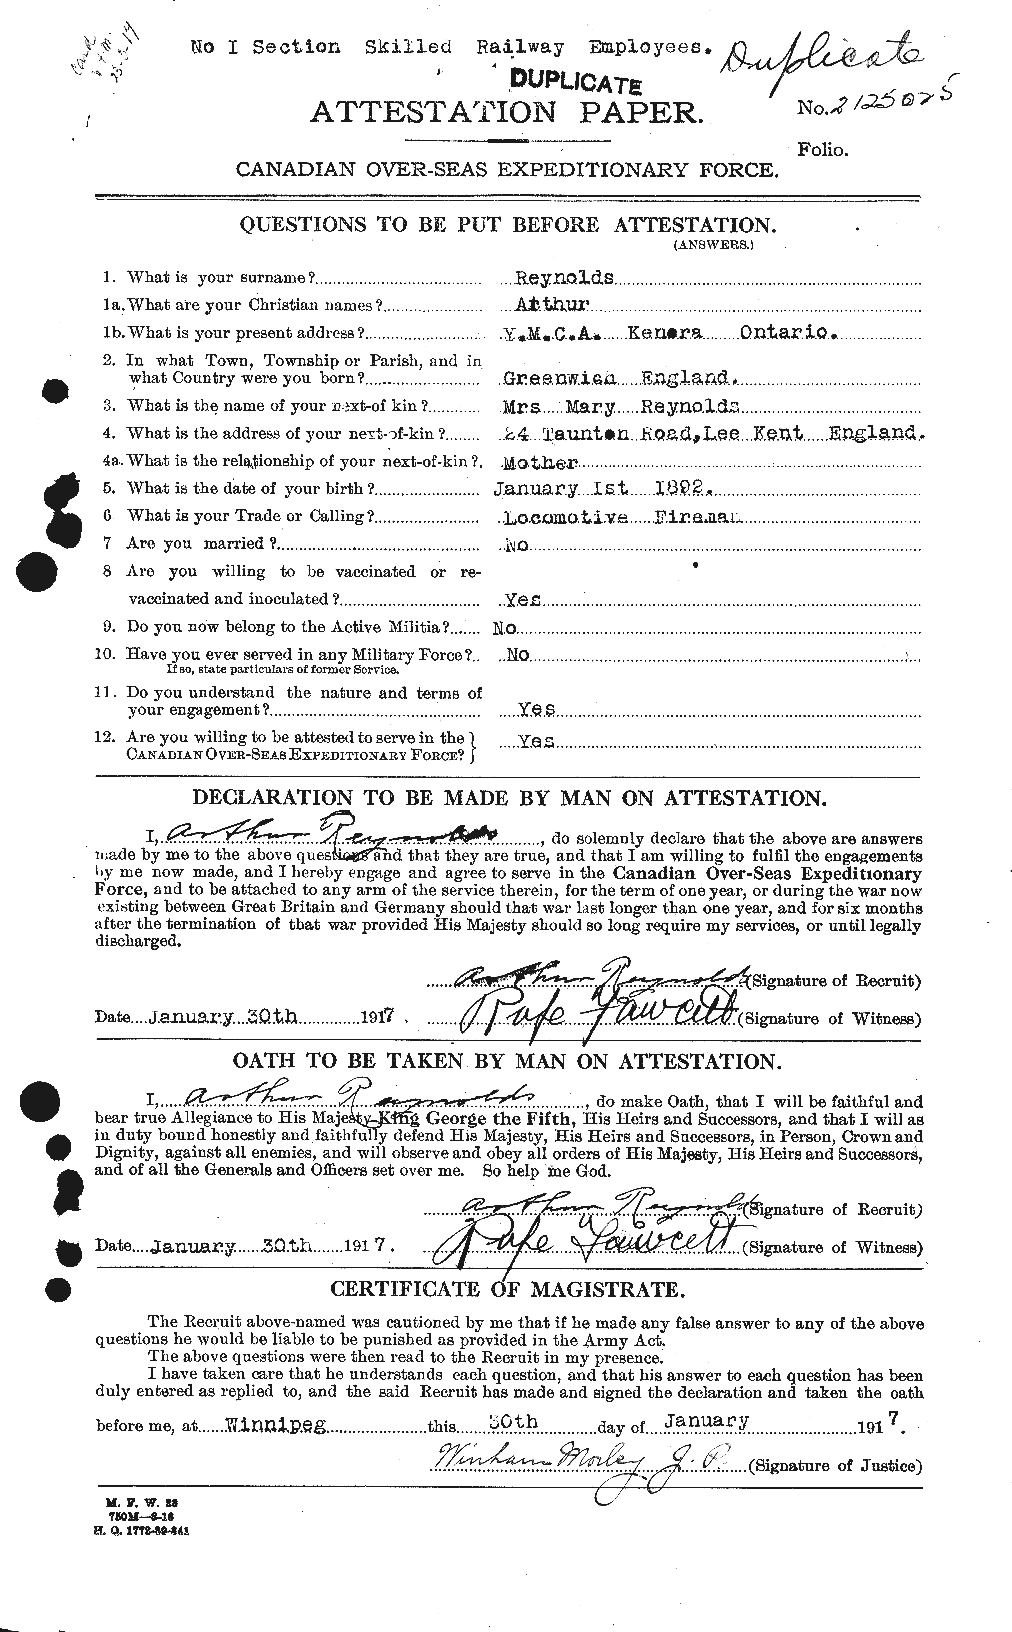 Personnel Records of the First World War - CEF 599079a